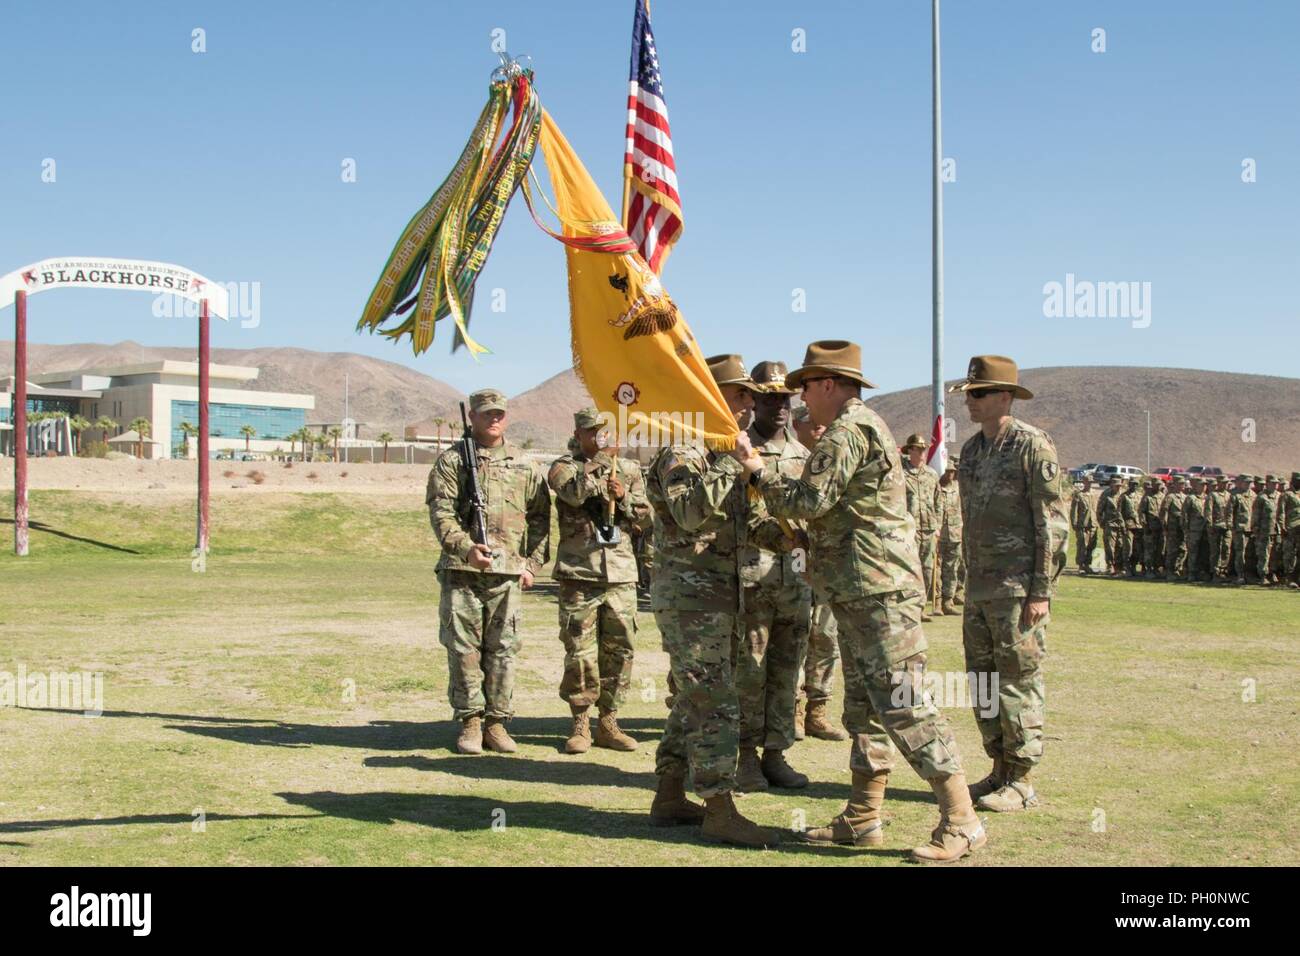 U.S. Army Col. Joseph Clark, commander, 11th Armored Cavalry Regiment, passes the 2nd Squadron, 11th ACR colors to incoming commander, Lt. Col. Russell Wagner, during the EAGLEHORSE change of command, on Fort Irwin’s Fritz Field, June 19, 2018. Stock Photo